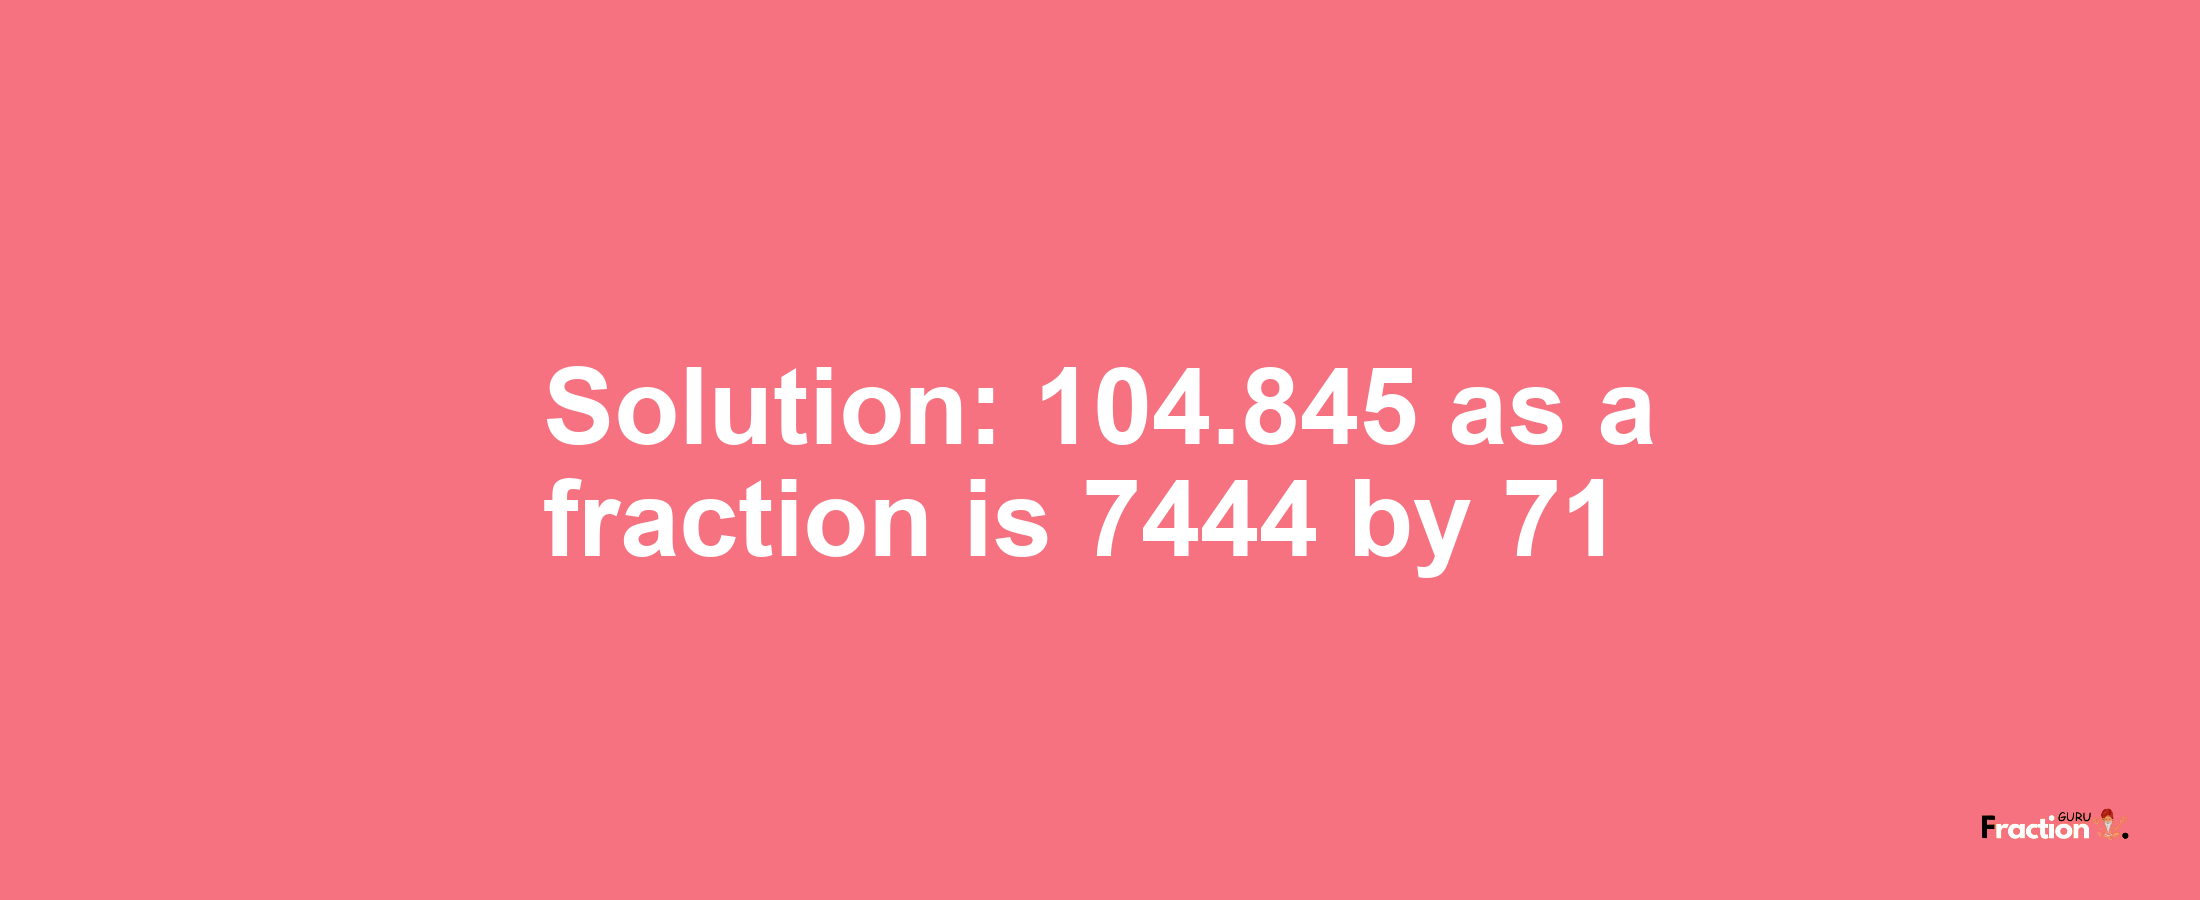 Solution:104.845 as a fraction is 7444/71